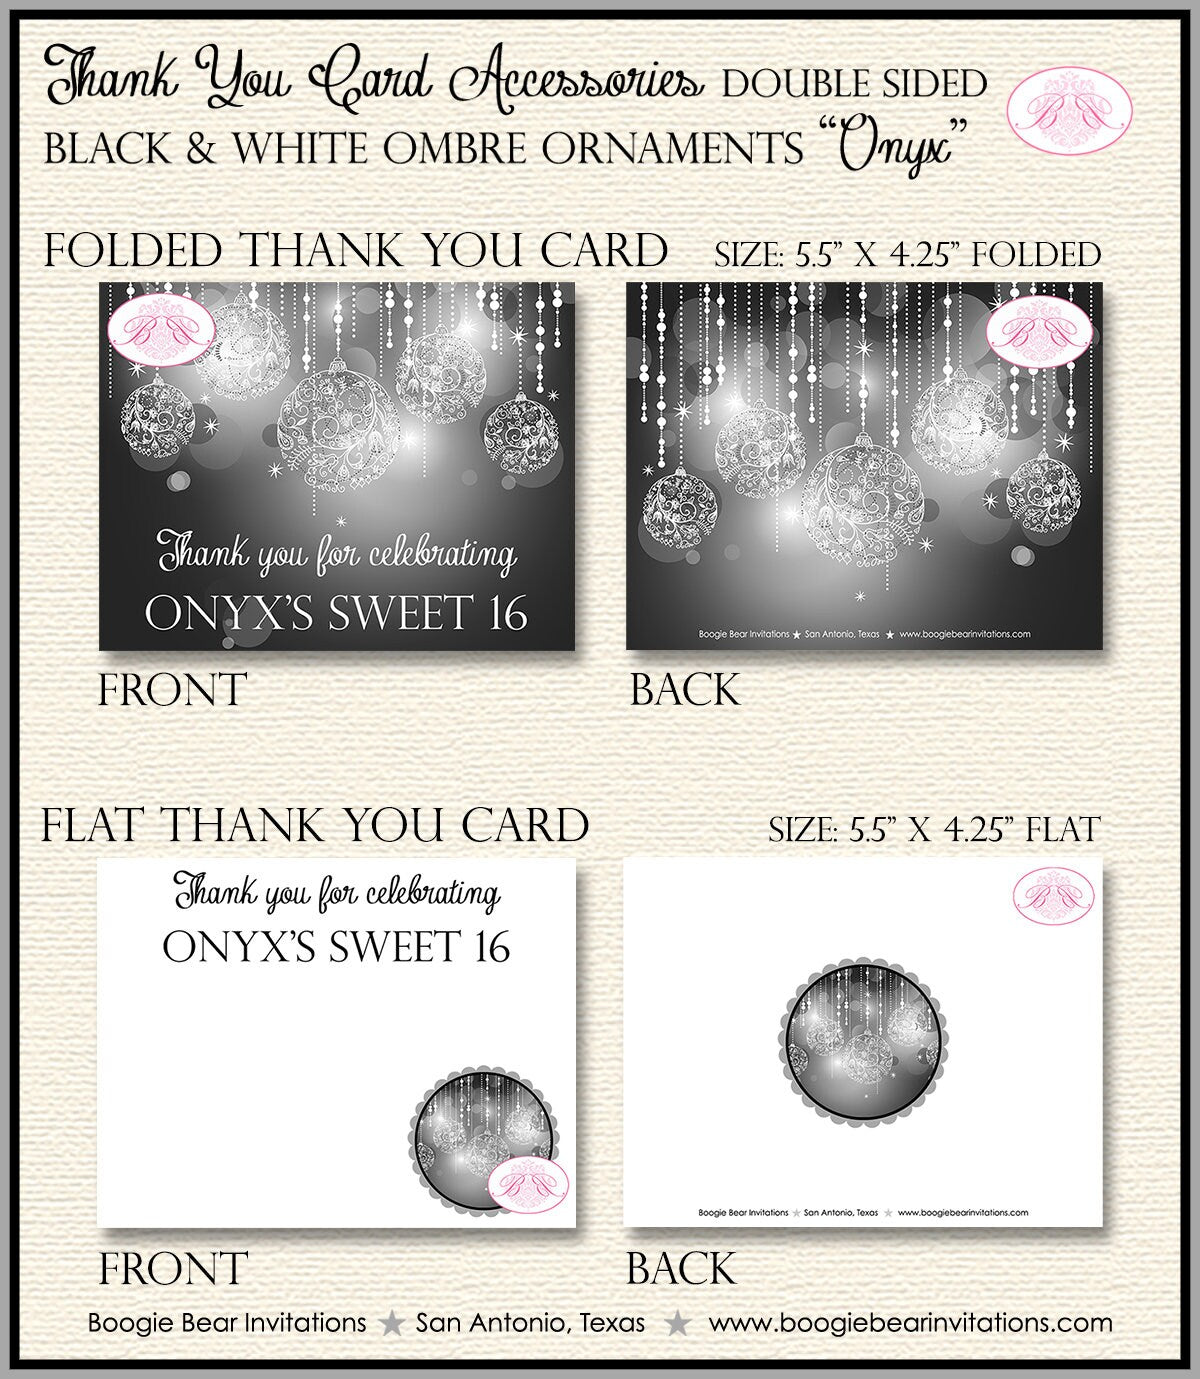 Sweet 16 Party Thank You Cards Black White Glowing Ornaments Birthday Ombre 1st 21st 30th 40th Boogie Bear Invitations Onyx Theme Printed